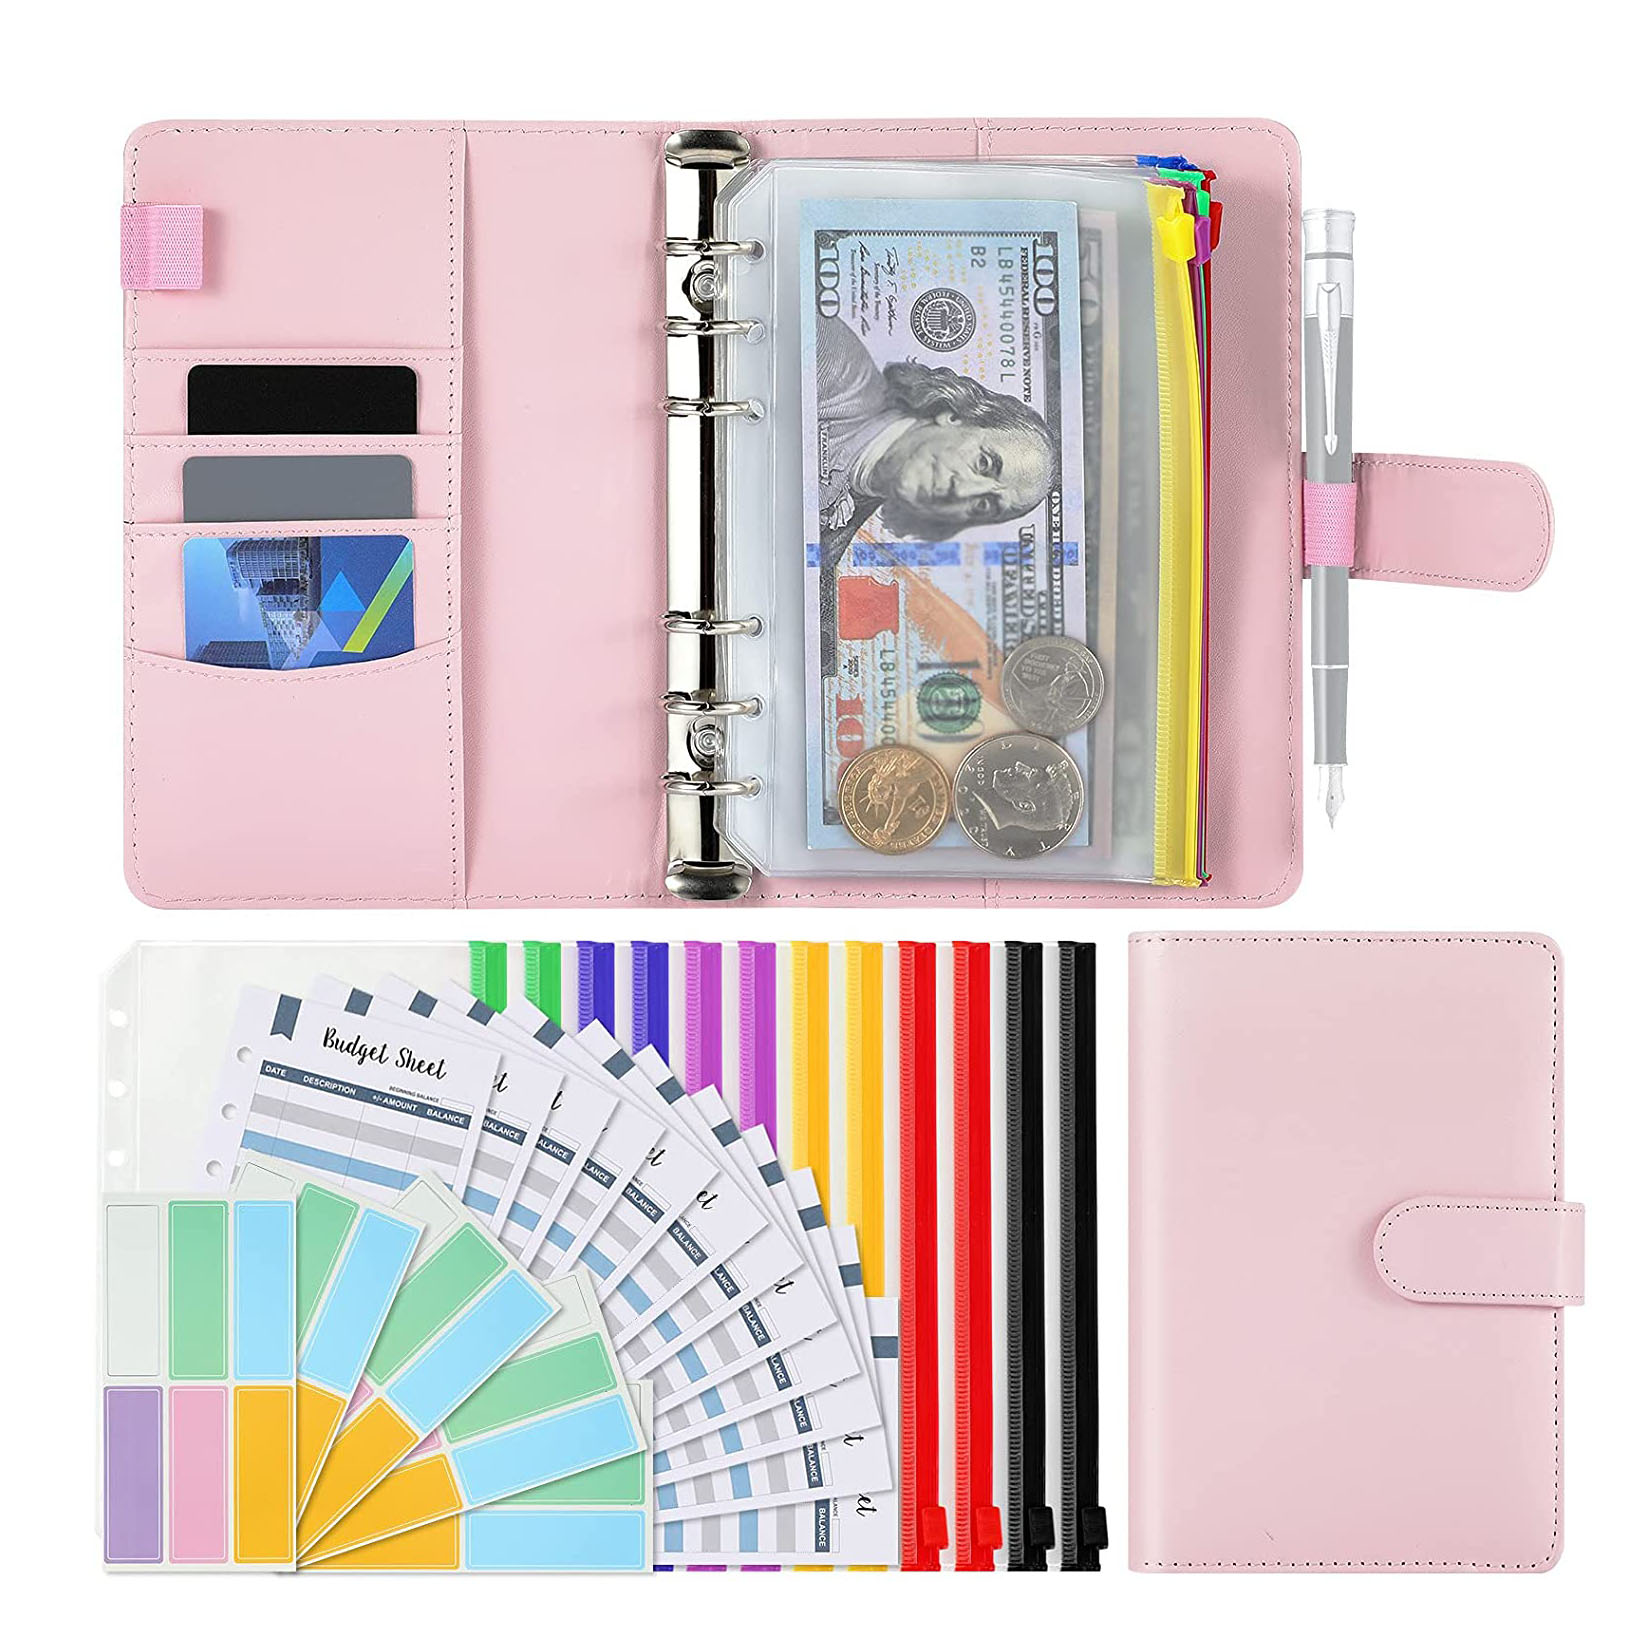 A6 PU Binder System Planner for Money Receipts Budgeting,12 Clear Cash Envelope,12 Expense Budget Sheets,Colorful Labels